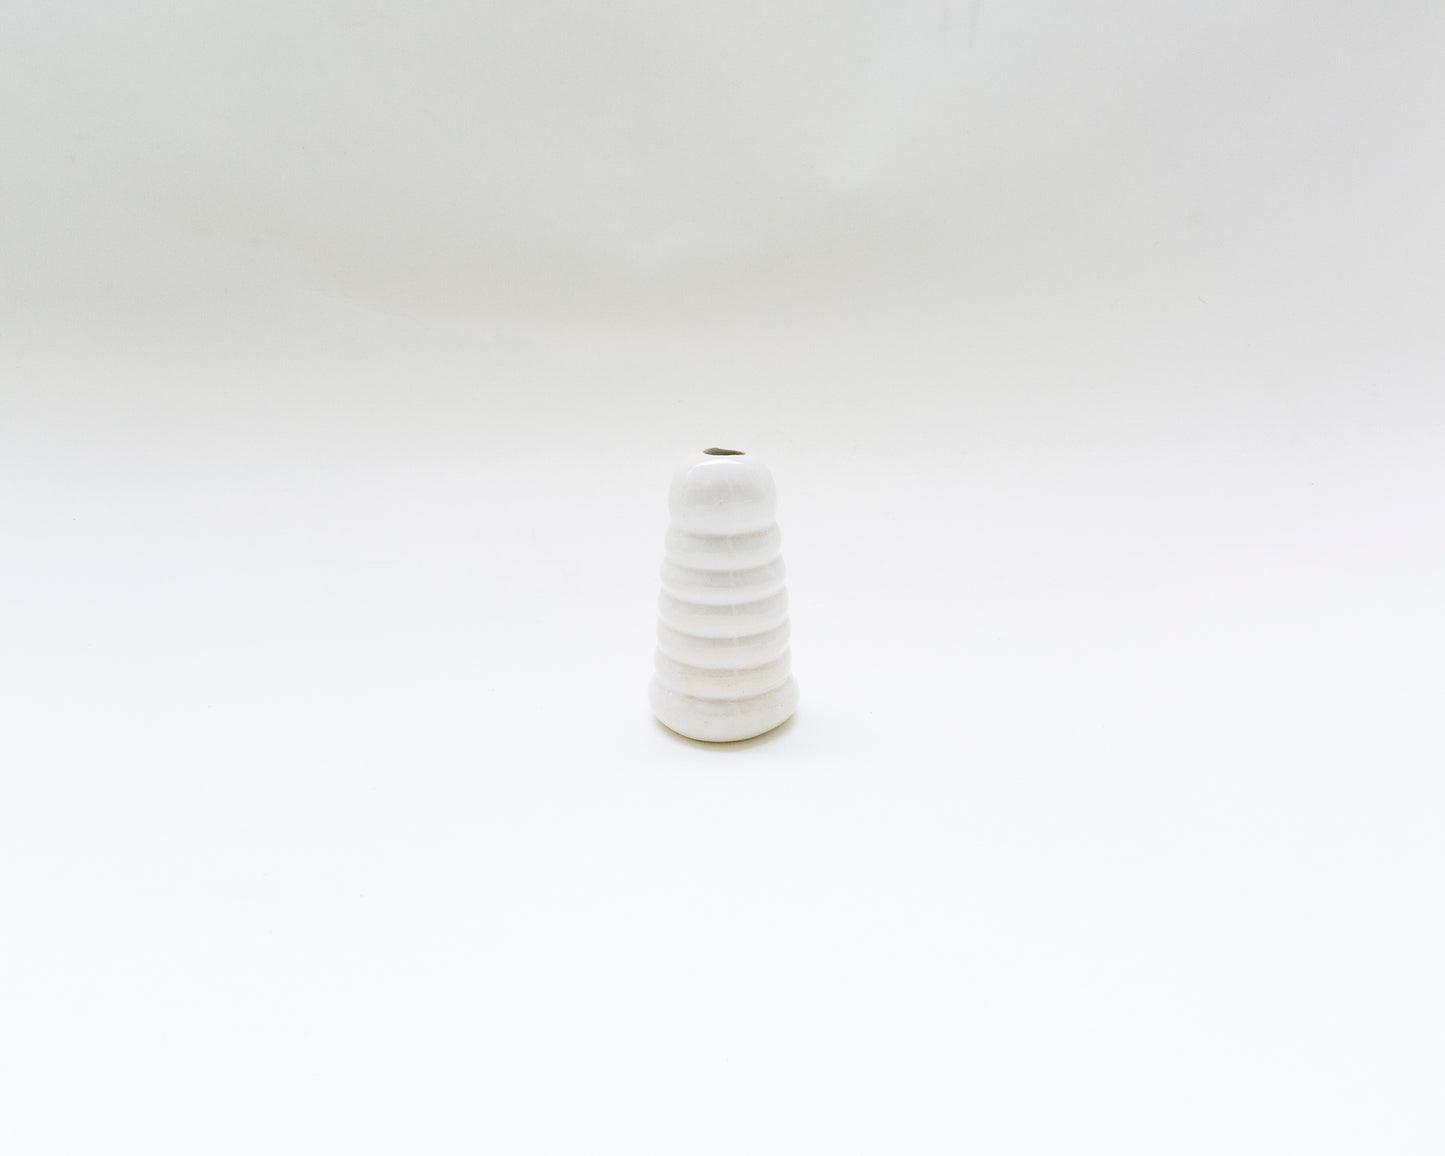 Coiled Water Vase I